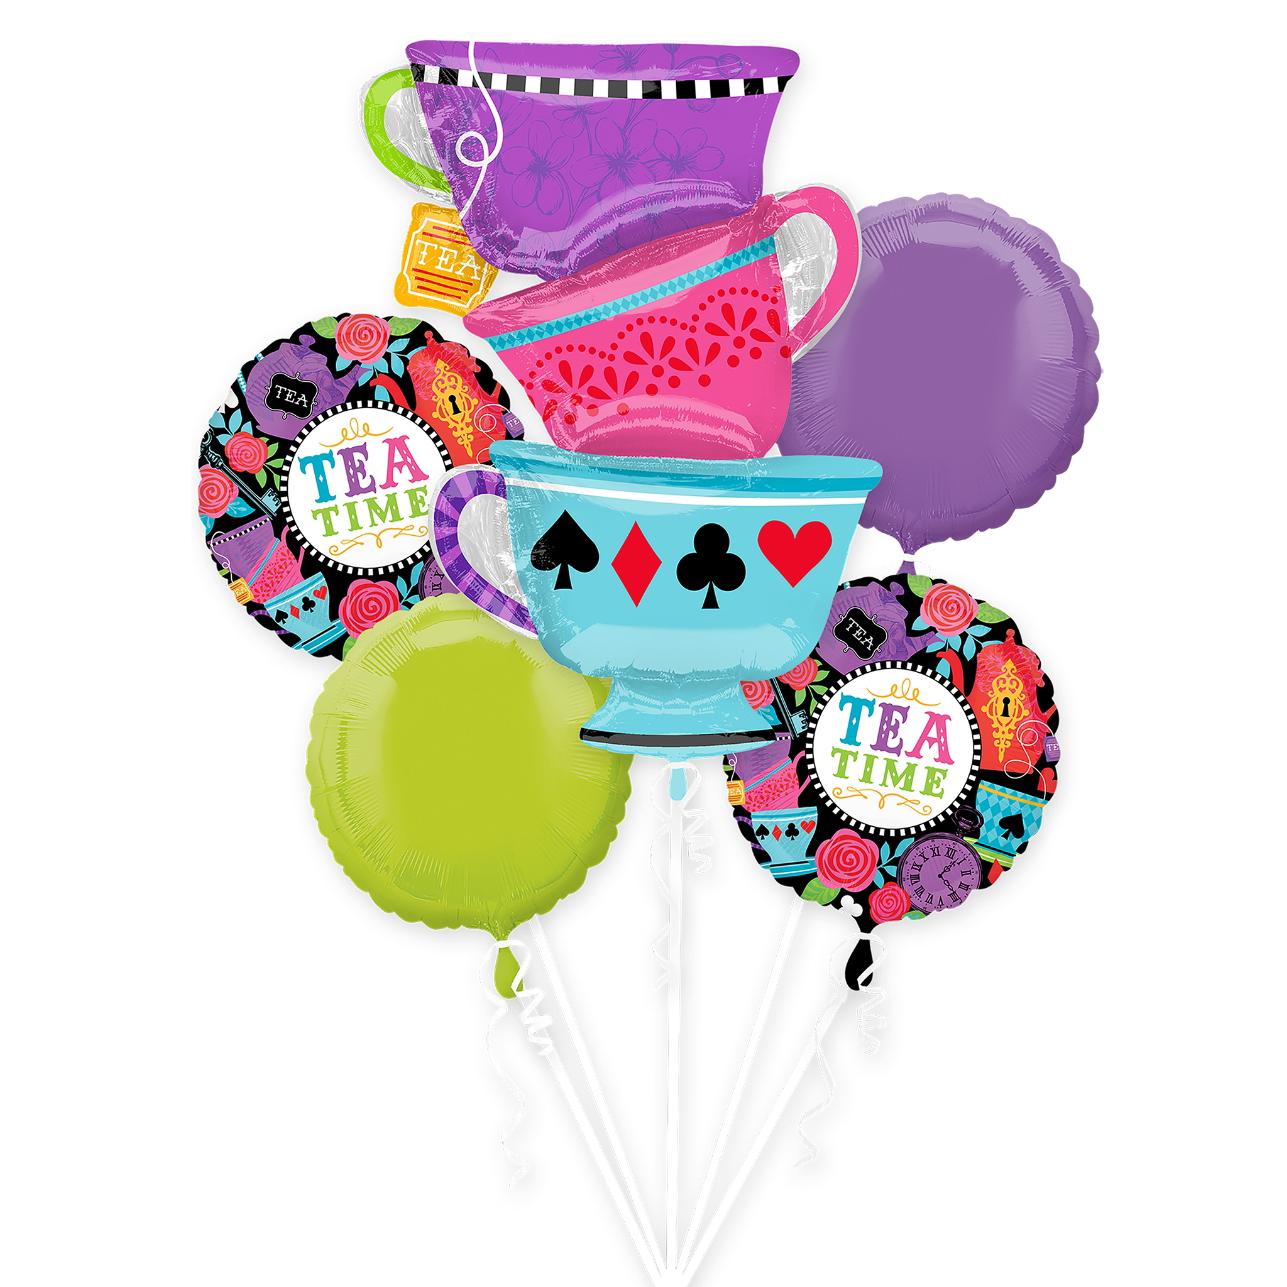 Mad Tea Party Balloon Bouquet 5pcs Balloons & Streamers - Party Centre